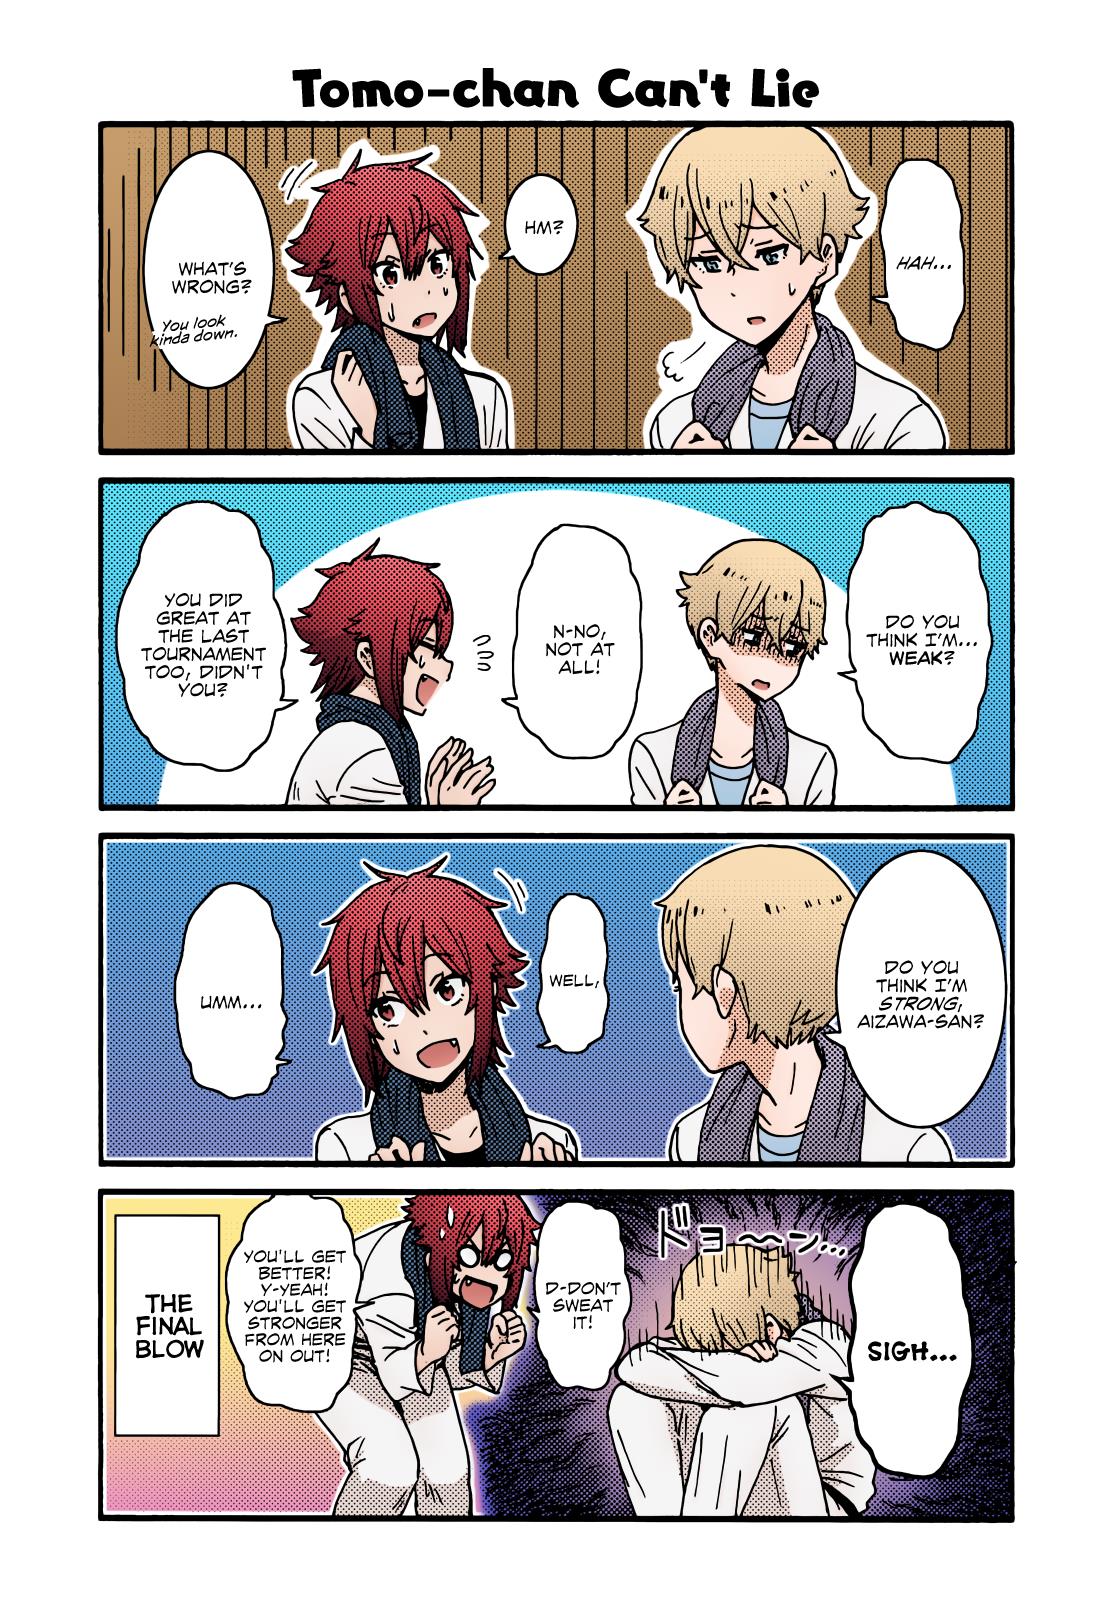 Tomo-Chan Wa Onnanoko (Fan Colored) Vol.2 Chapter 17.5: Volume 2 Extras - Picture 1